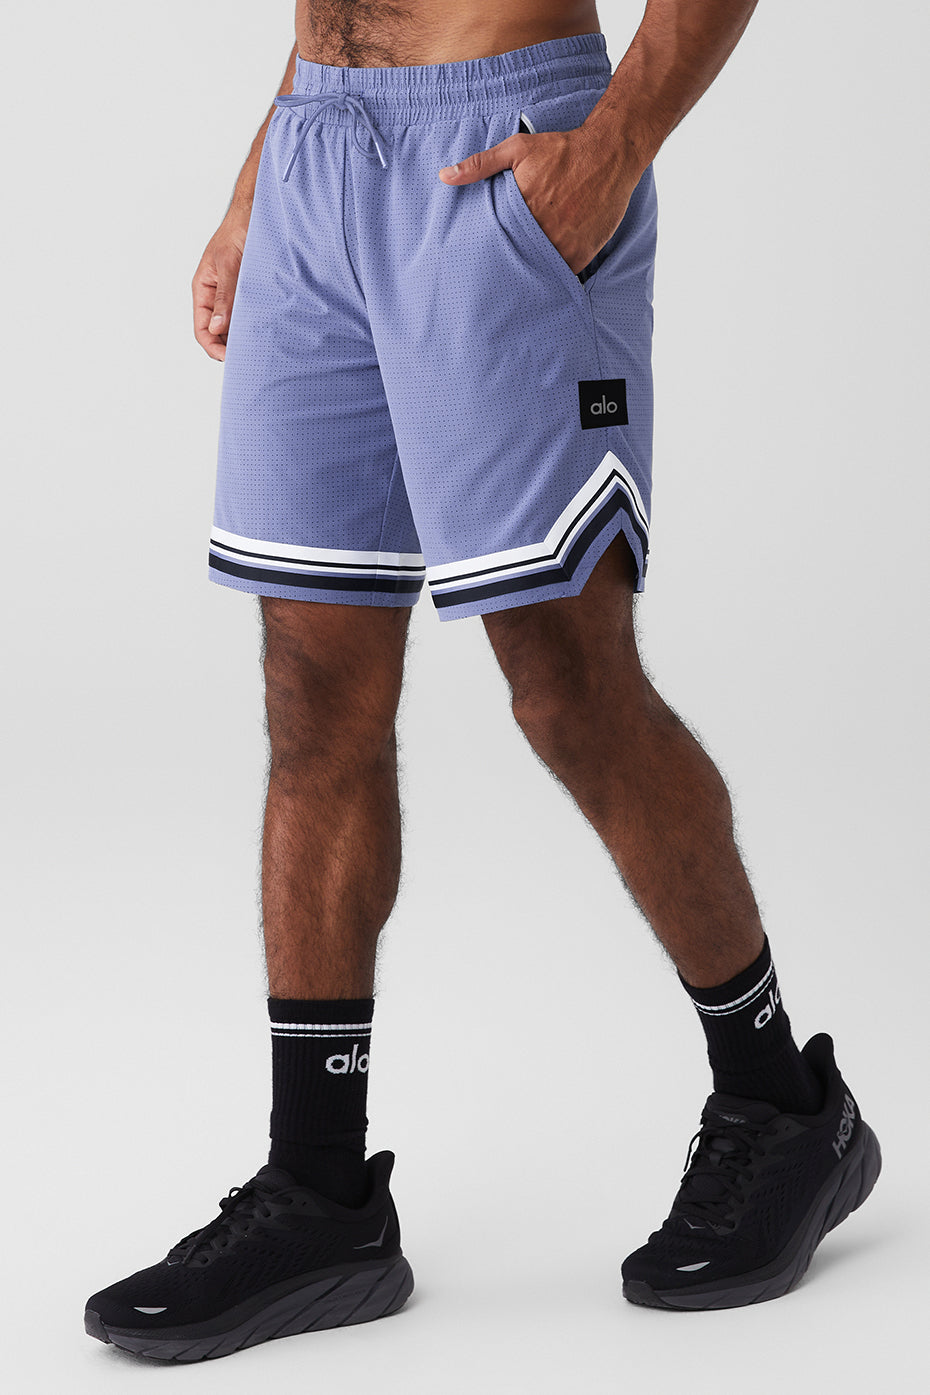 9' Traction Arena Short - Infinity Blue